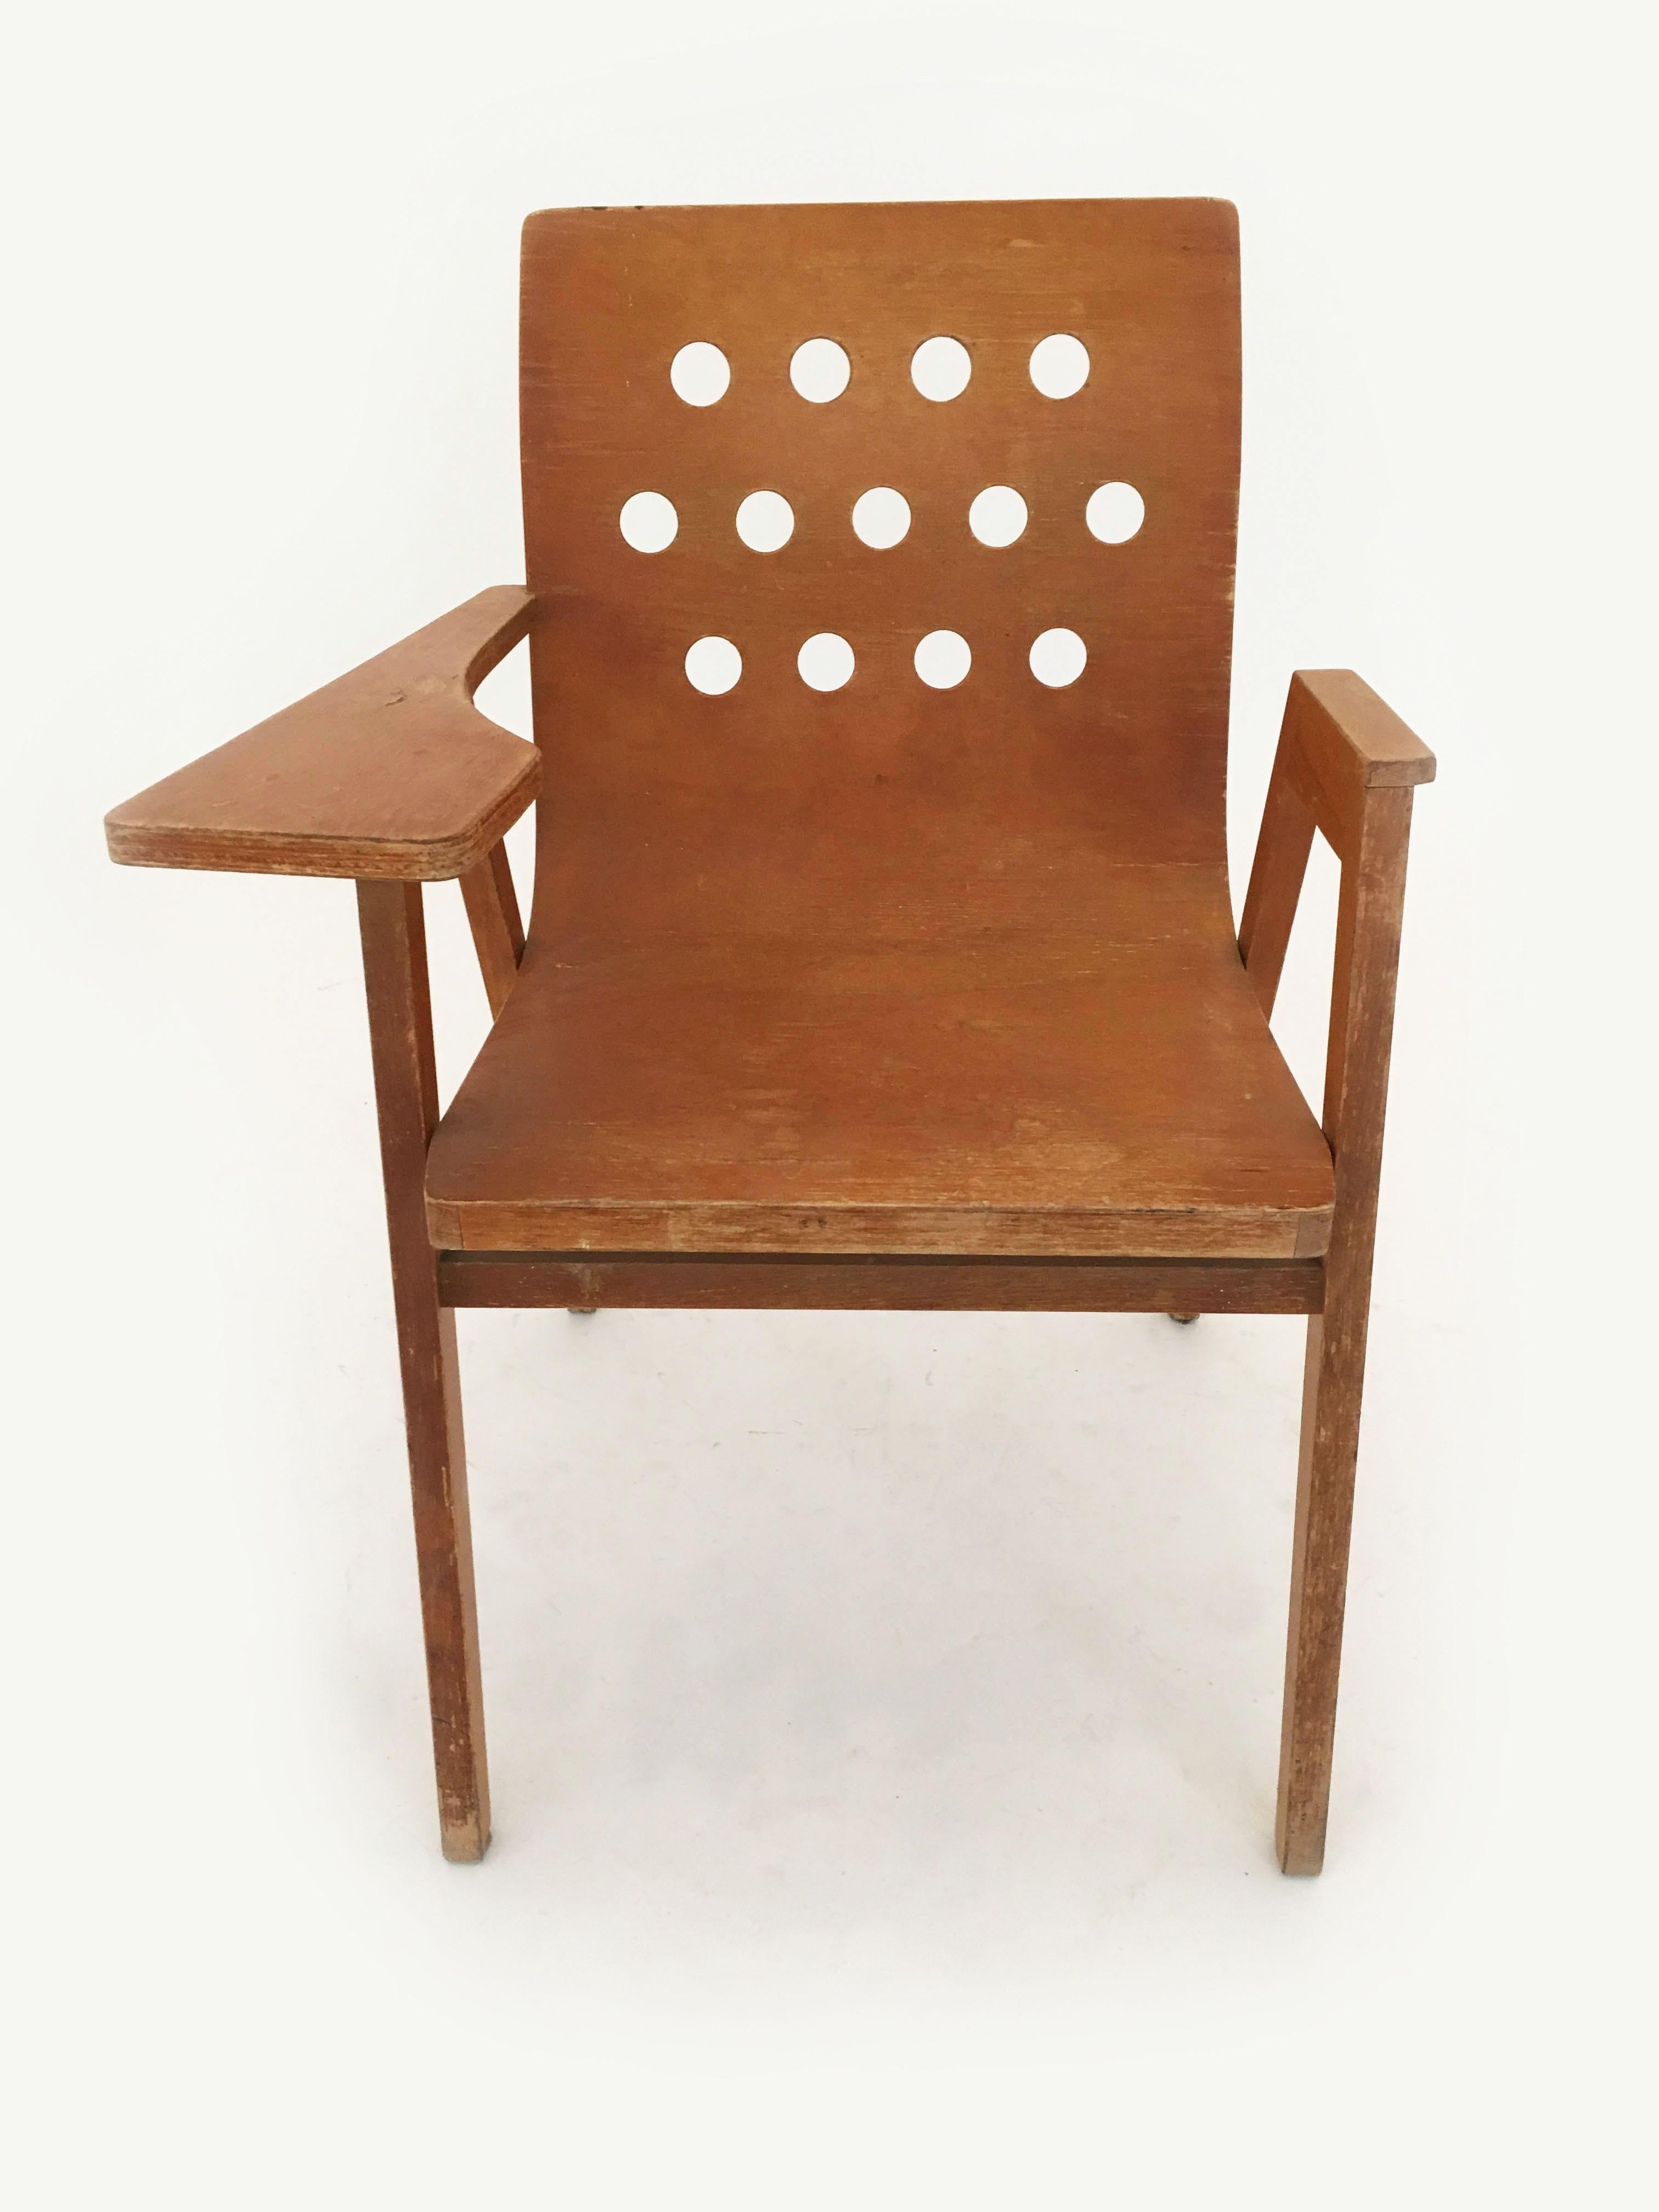 Rare Roland Rainer Stadthallen chair with writing desk designed by Austrian architect Roland Rainer, Austria 1950s. In good vintage condition with some wear due to age and usage as seen in the pictures. We love the authentic patina, it adds so much